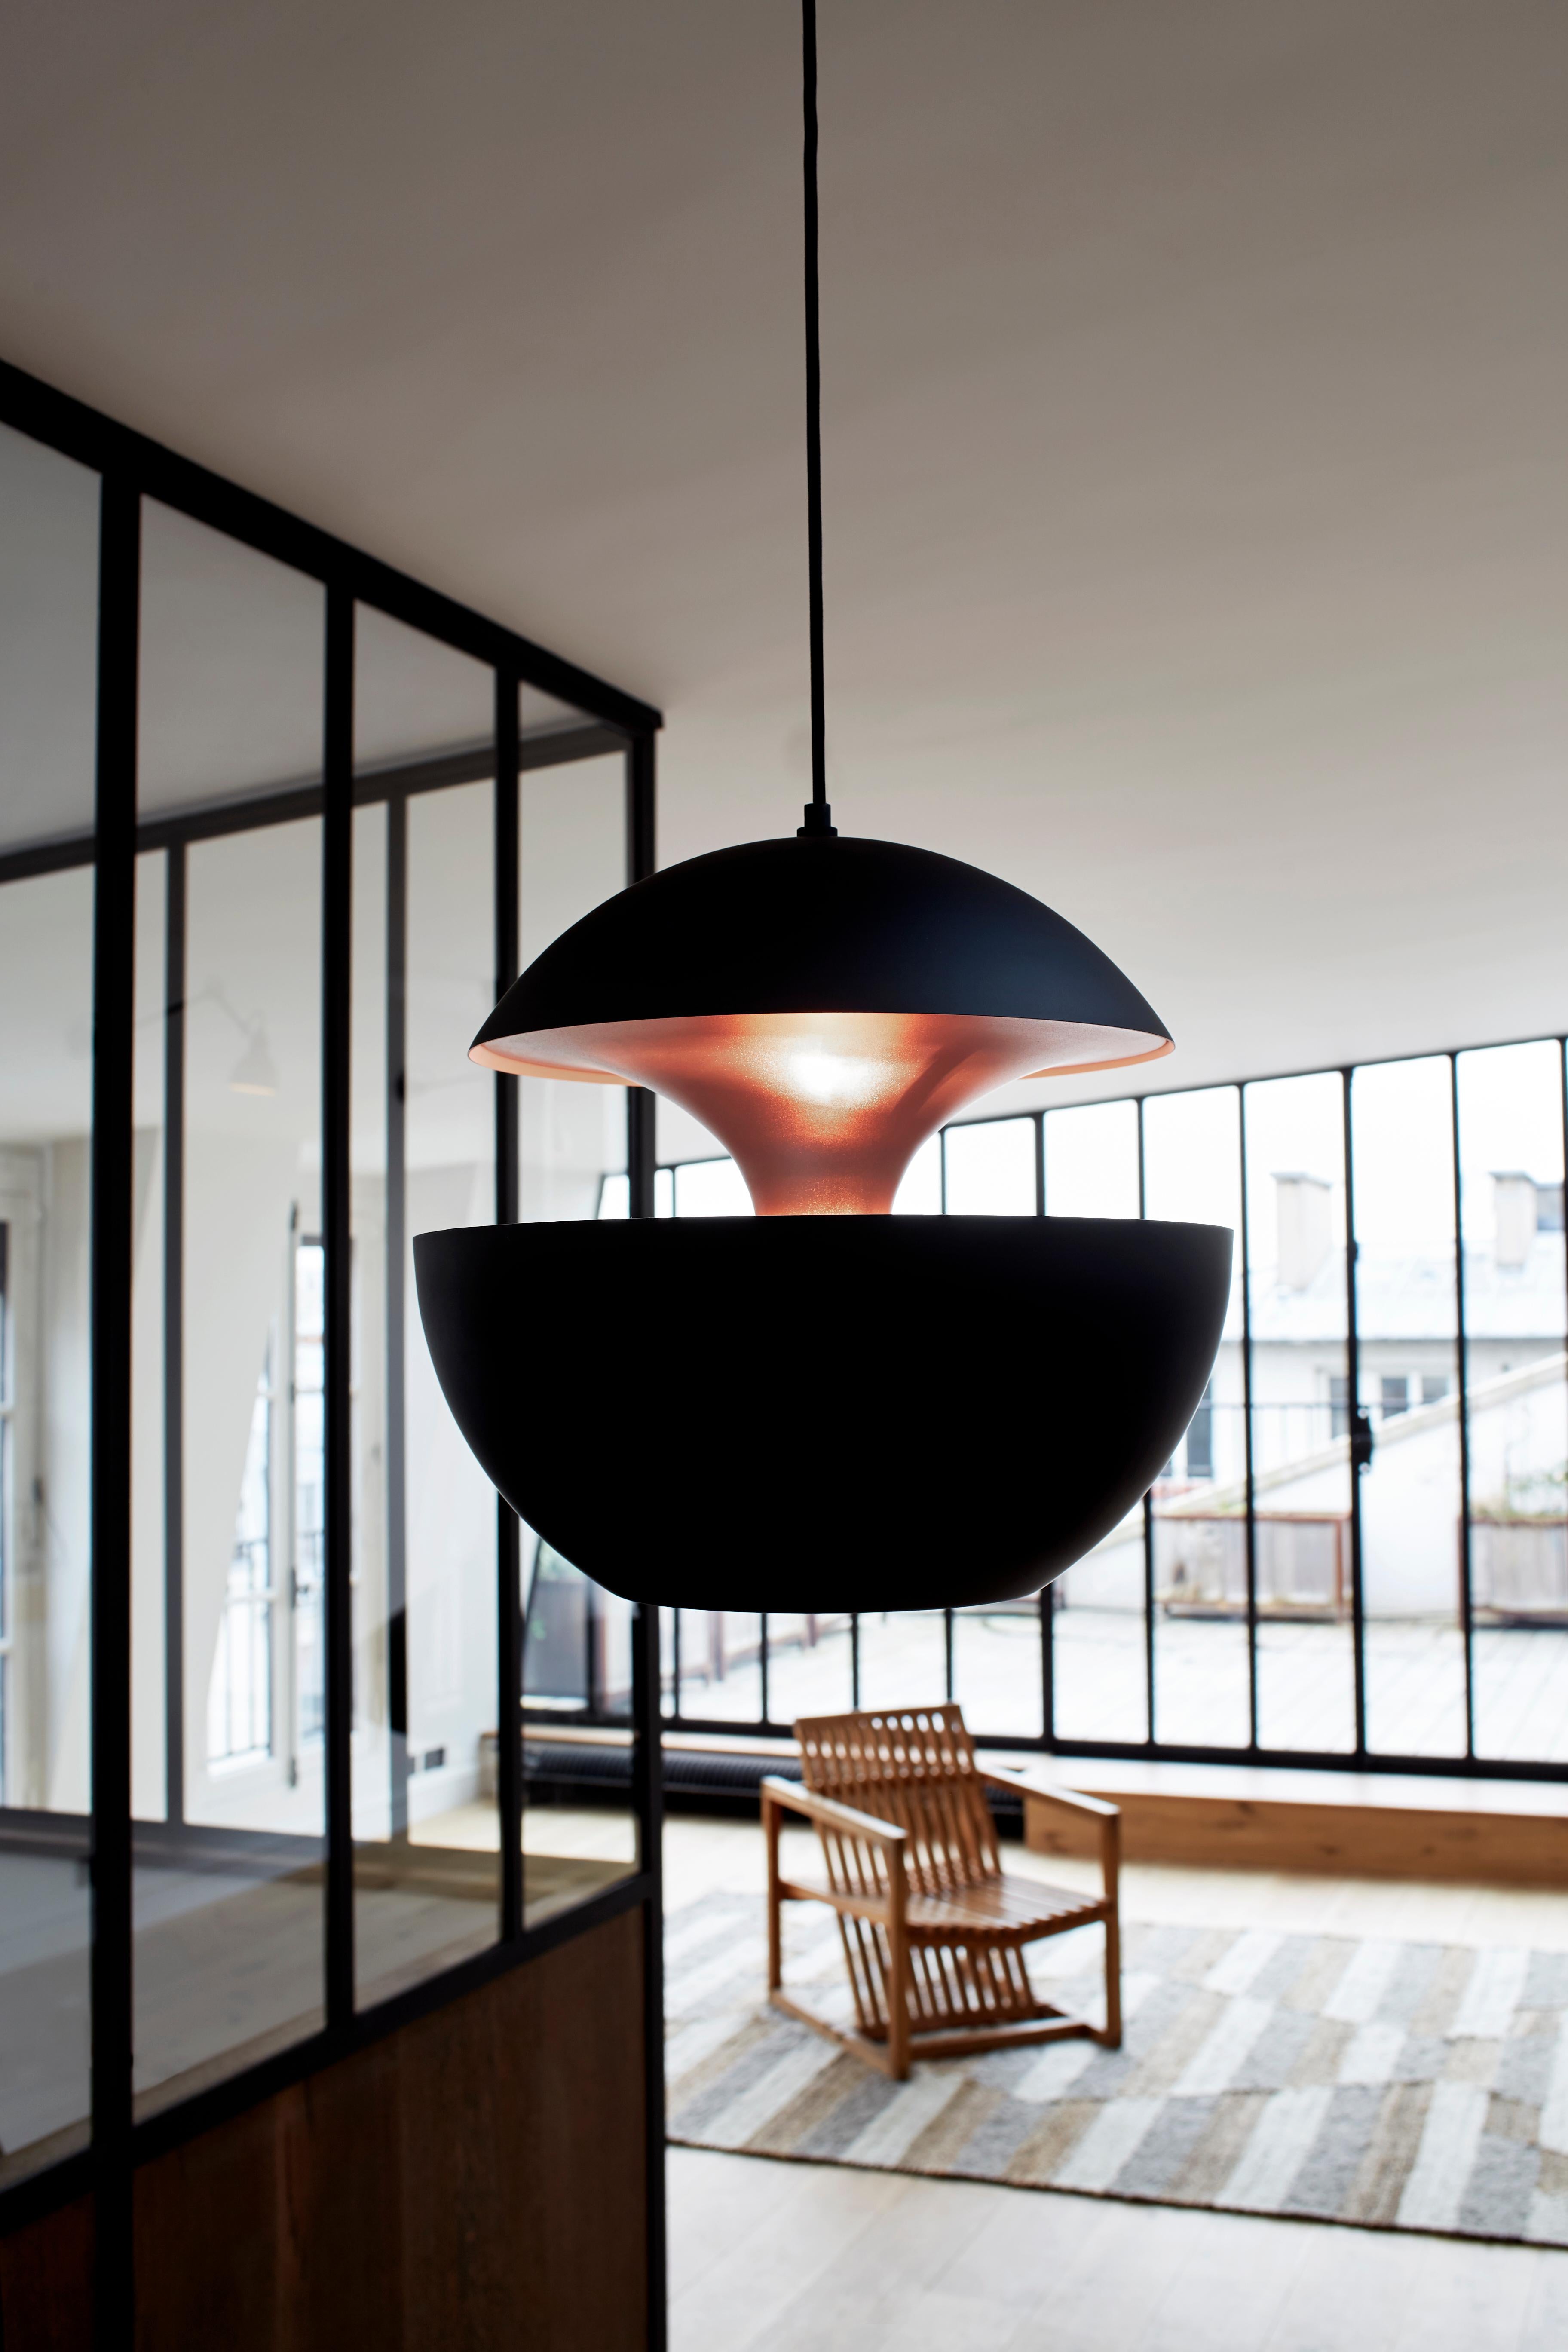 Here Comes the Sun extra large black and copper pendant lamp by Bertrand Balas
Dimensions: D 45 x H 45 cm
Materials: Aluminum
Available in different sizes and colors, please contact us.

All our lamps can be wired according to each country. If sold